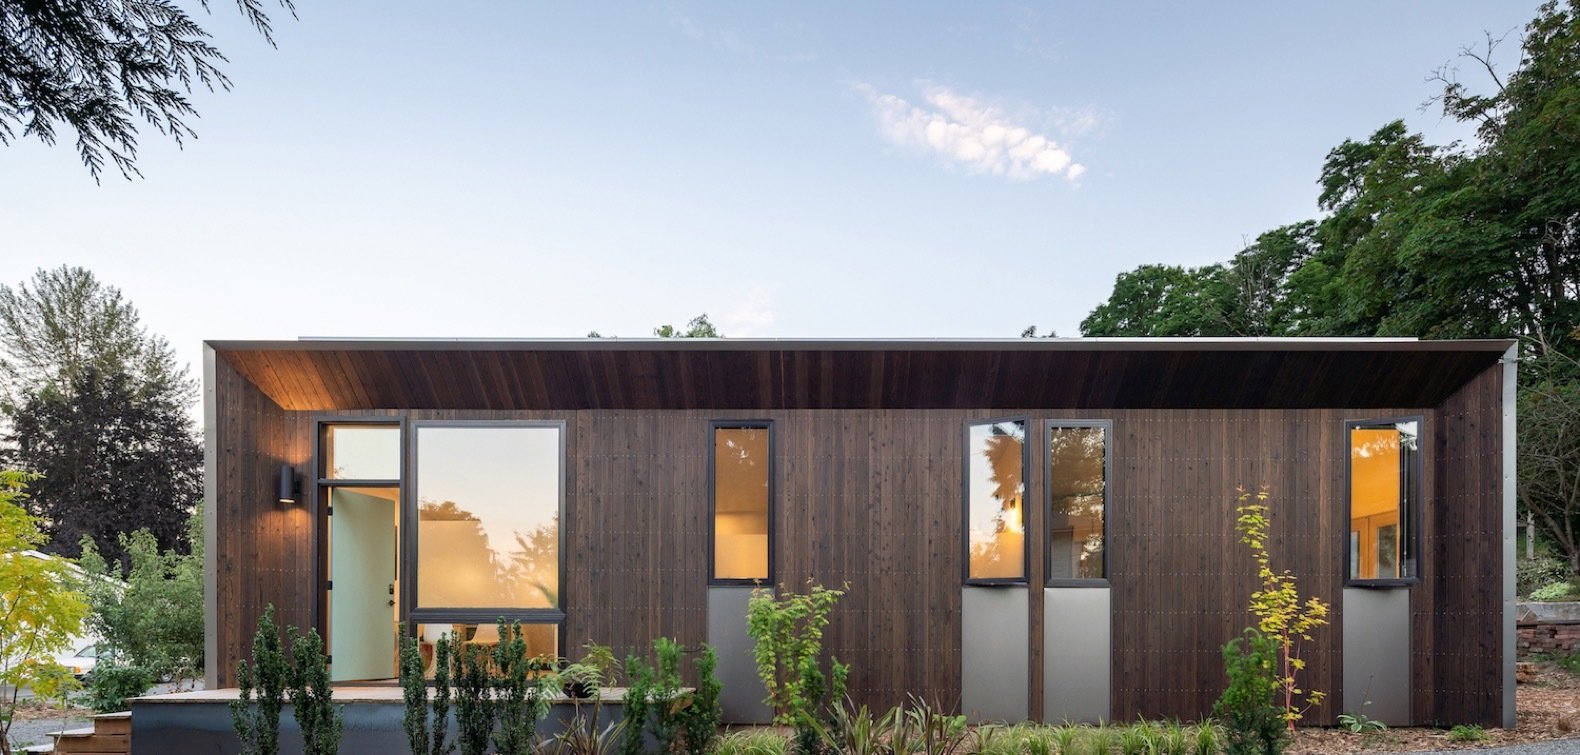 This Solar-Powered Prefab in Seattle Raises the Bar for Sustainability